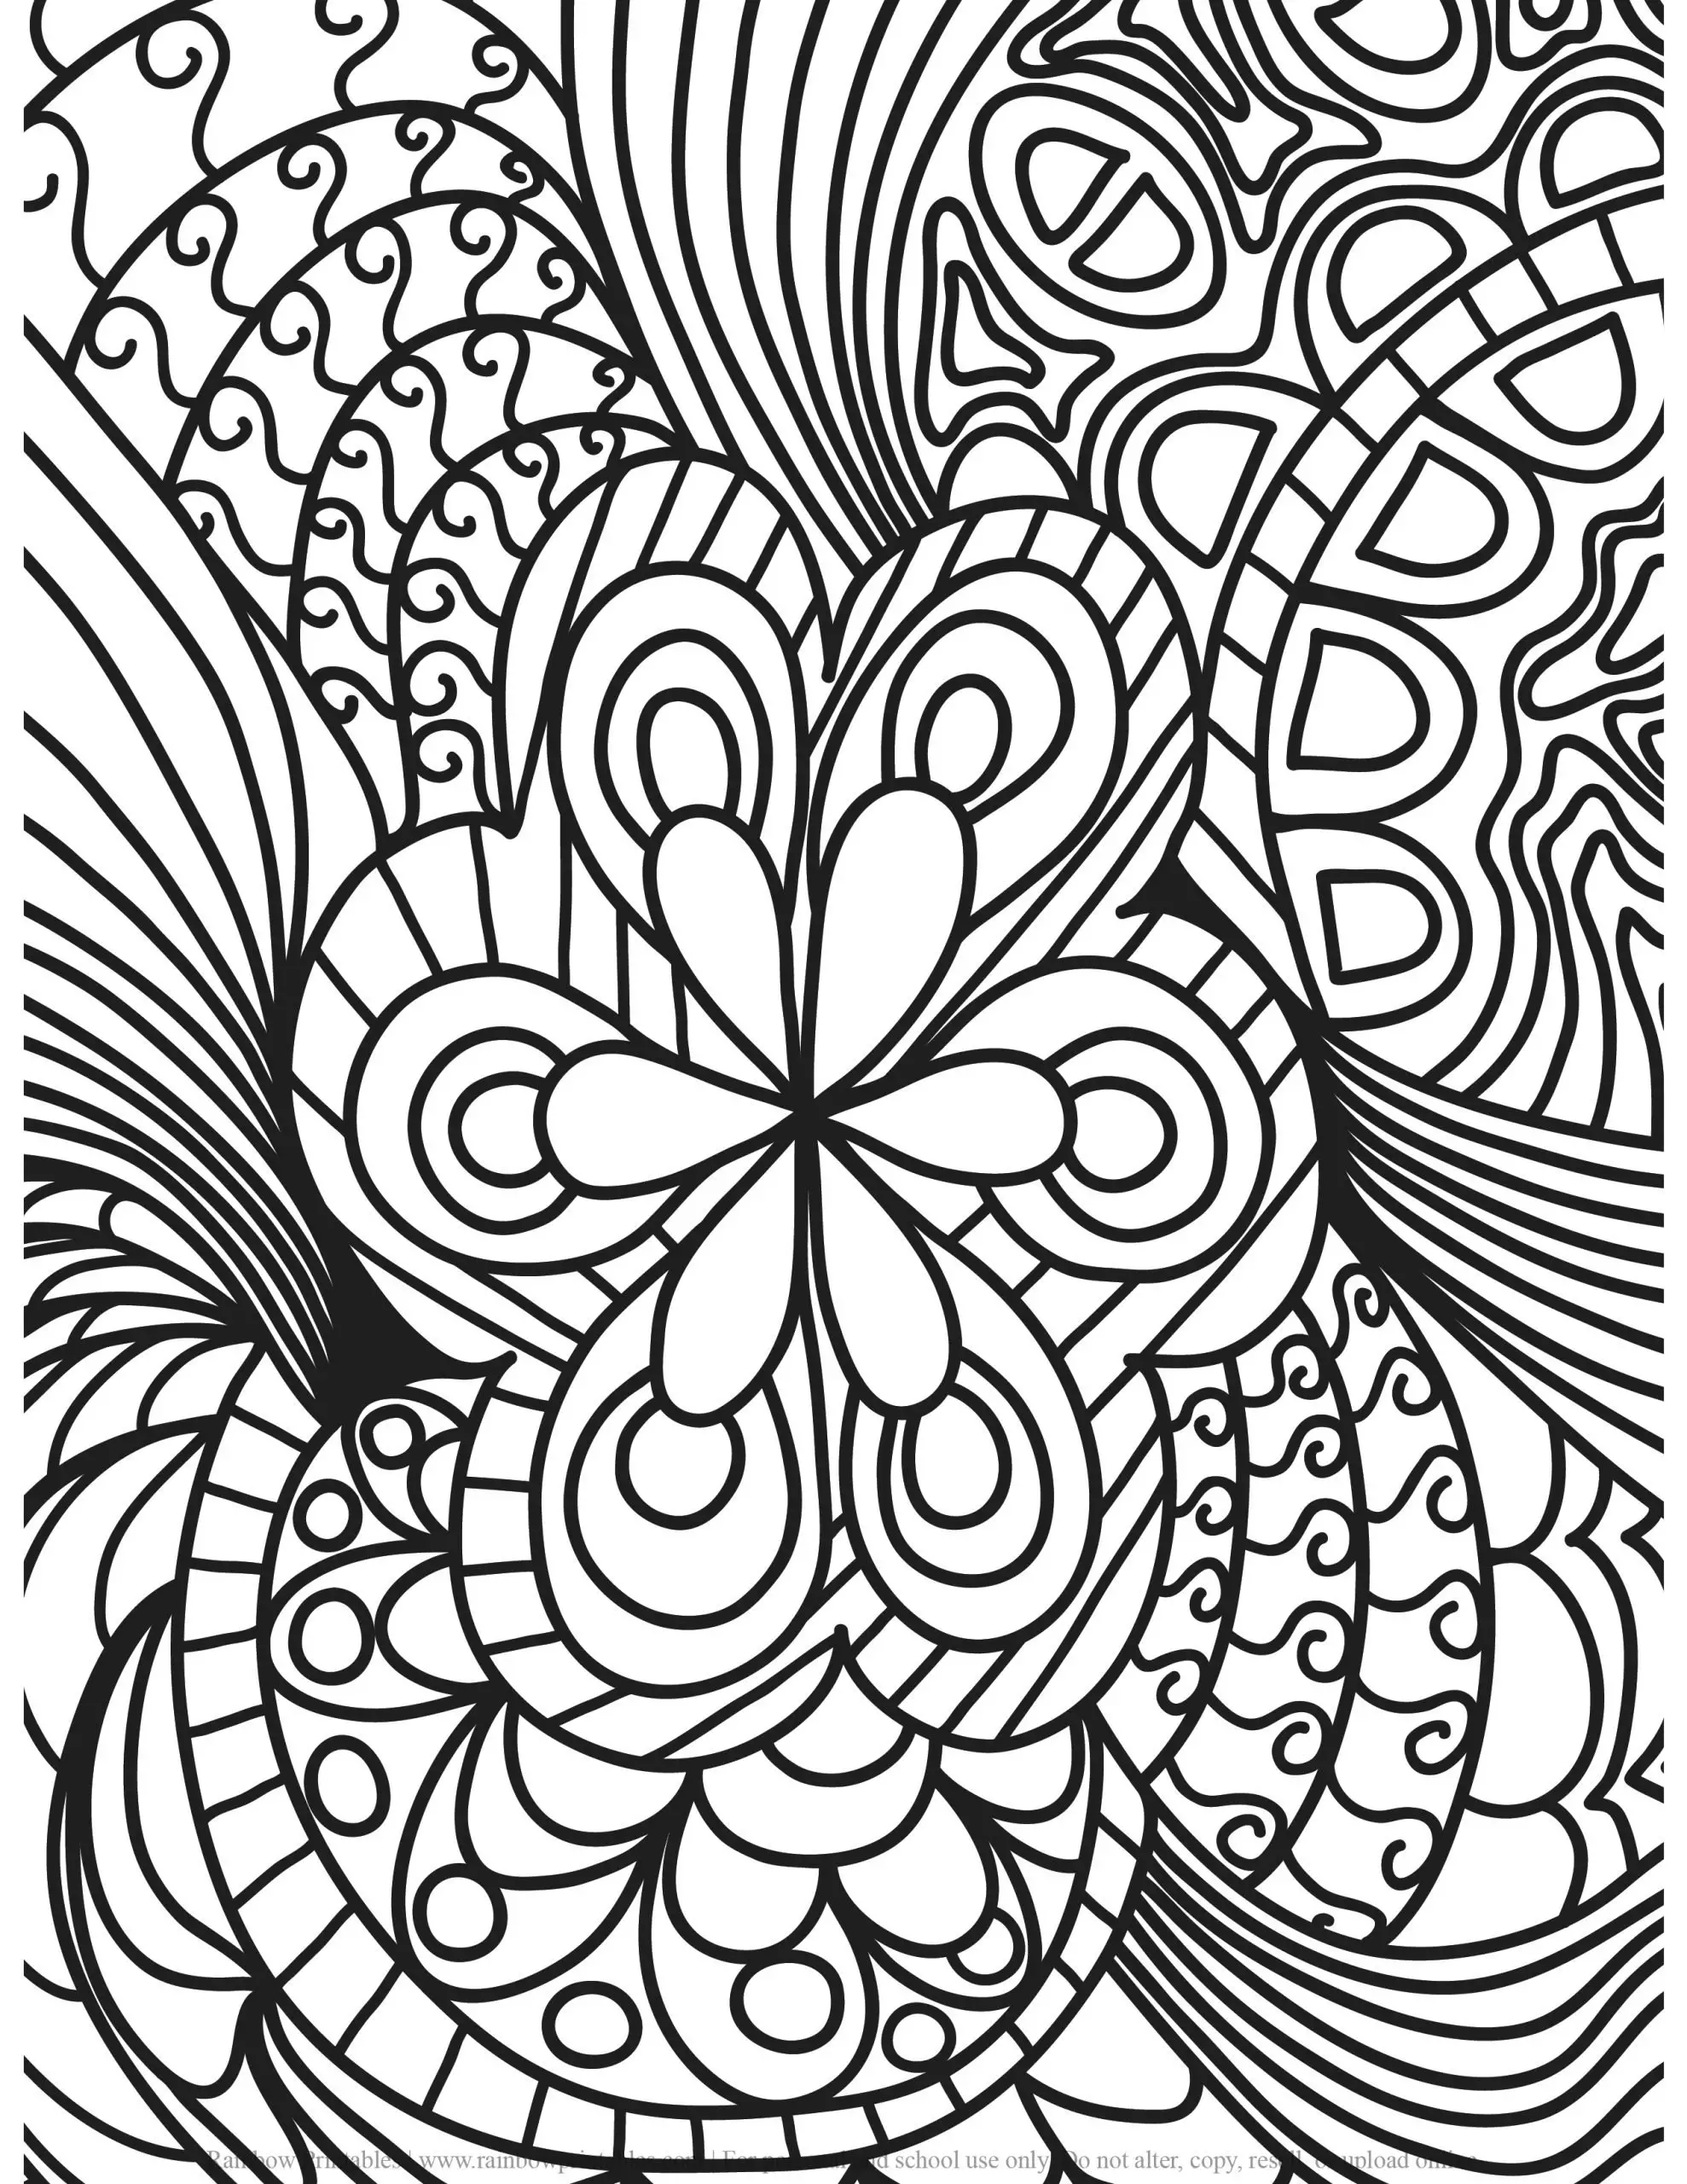 ADULT COLORING PAGES ANTI-STRESS RELIEF PRINTABLE MANDALA PATTERN RELAXING ACTIVITY PRINTABLE Flower